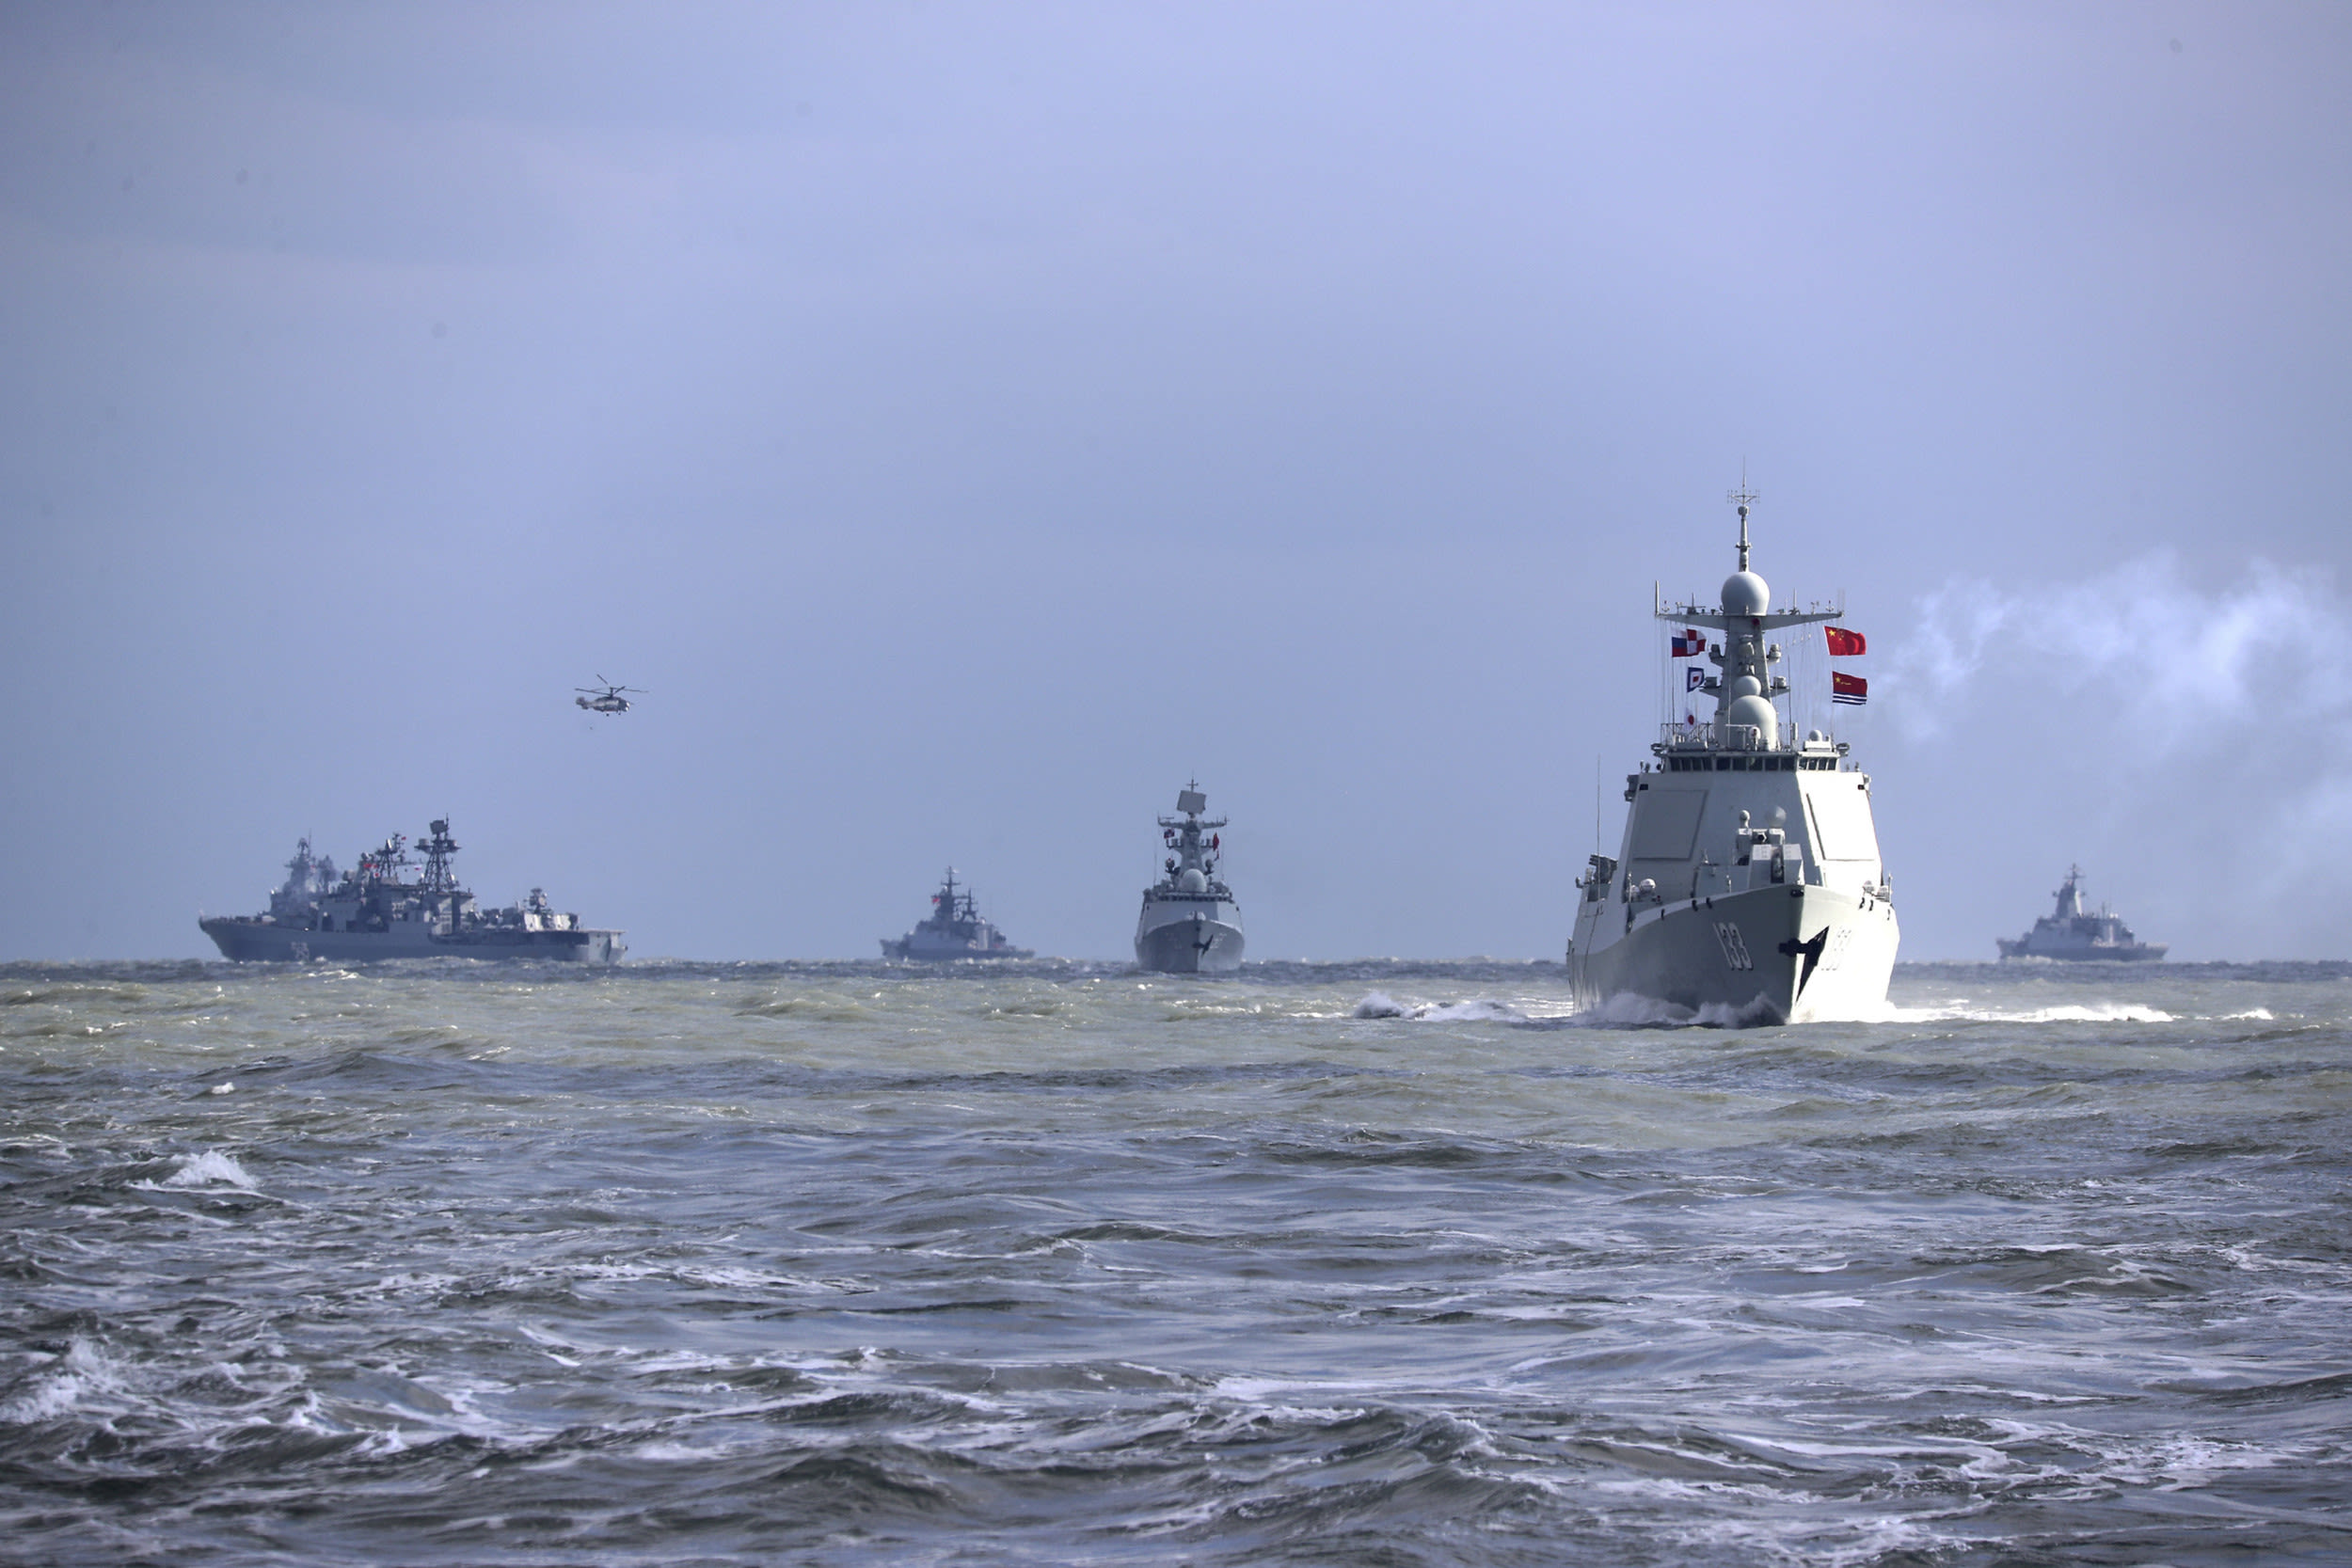 China-Russia joint naval drills target "security threats"